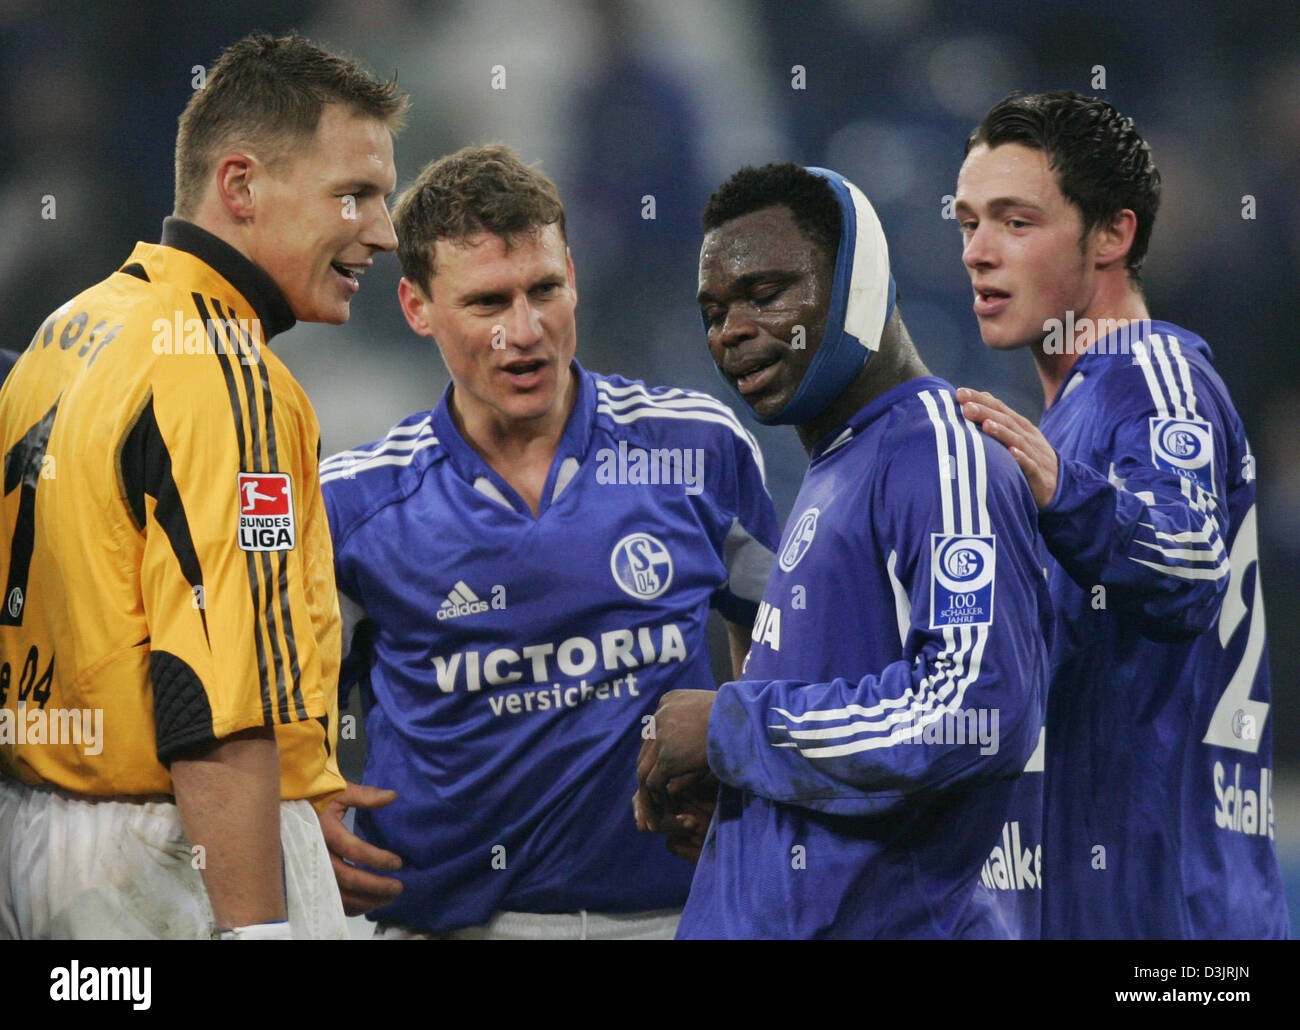 (dpa) - German Premier League (Bundesliga) match FC Schalke 04 vs. SV Werder Bremen at the 'AufSchalke' stadium on 22 January 2005. Schalke's goalkeeper Frank Rost, Ebbe Sand and Christian Pander (l to r) thank goalscorer Gerald Asamoah (second right), who had to play with a head bandage after an injury during the first half. Schalke won the match 2:1. Stock Photo